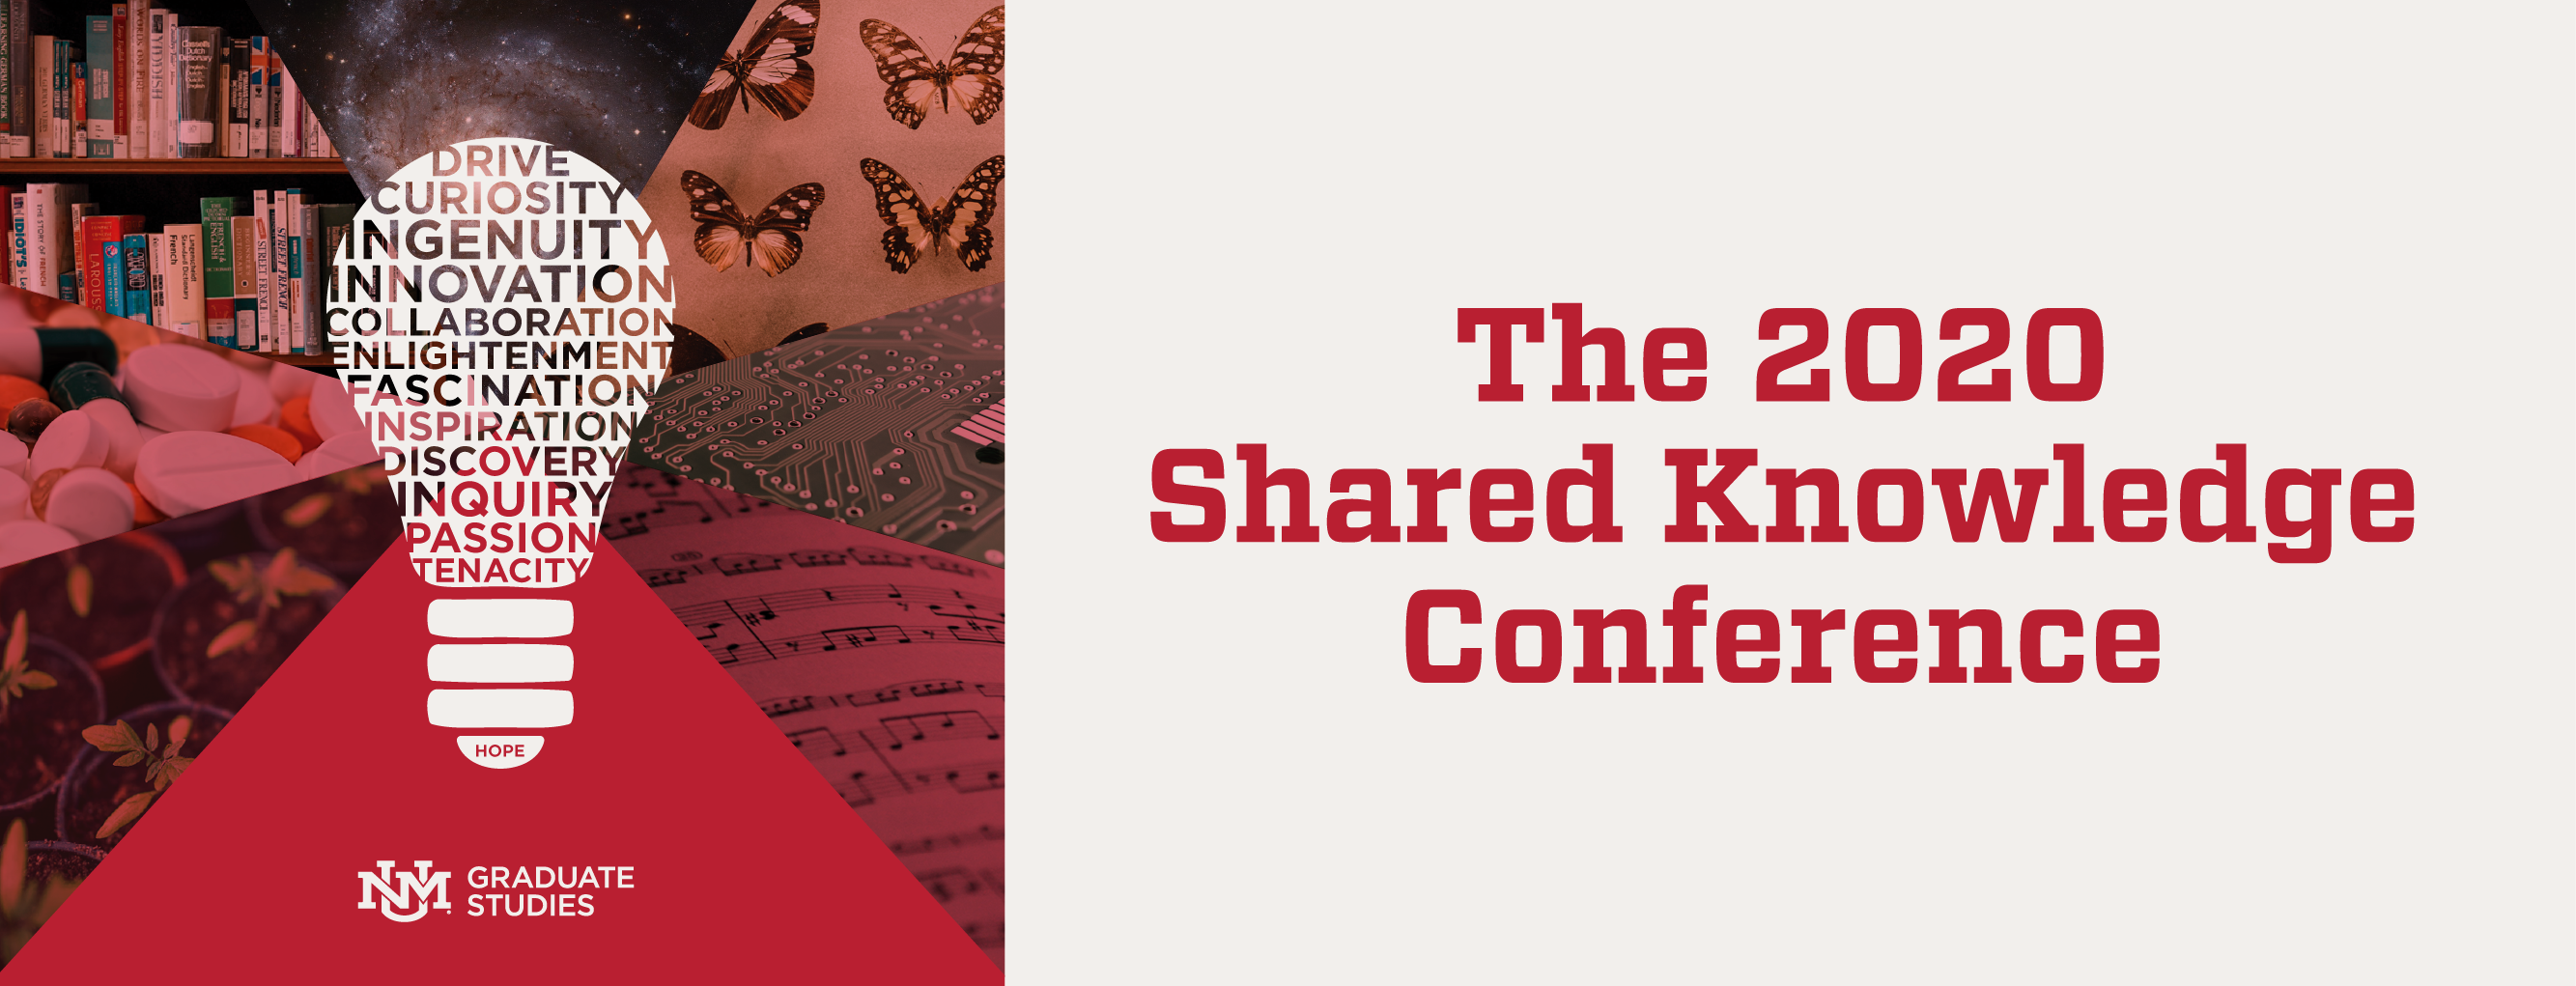 2020 Shared Knowledge Conference